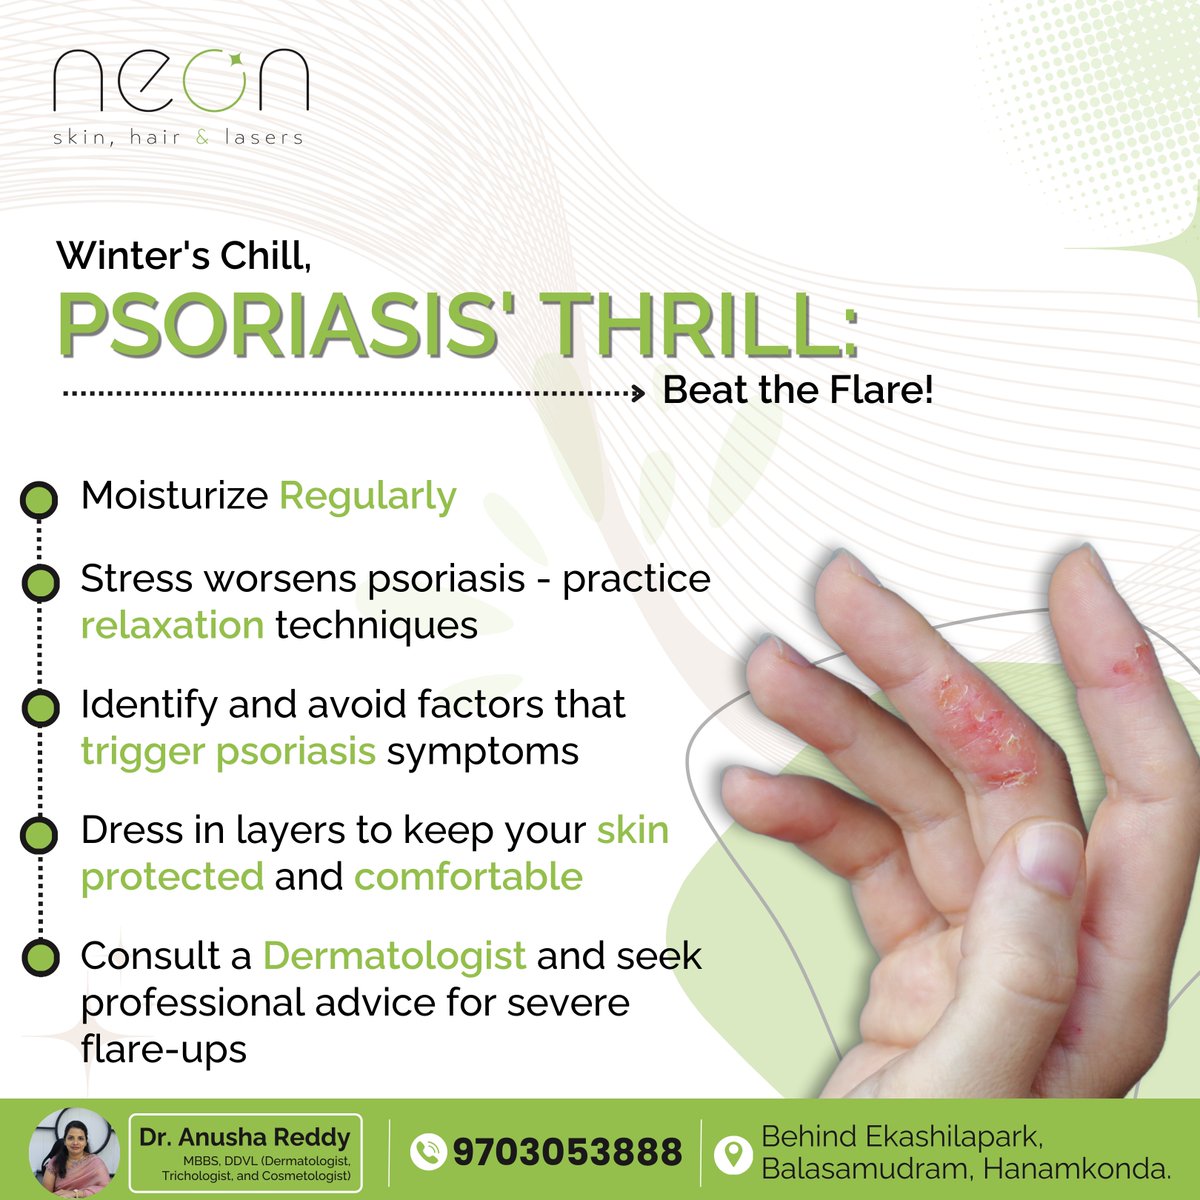 ❄️❤️ Don't let winter's chill bring on a psoriasis thrill! Beat the flare with these tips!

#dermatologytips #wintersblues #psoriasiswarrior #flareupfighter #beattheflare #winterskin #psoriasisawareness #skinhealth #winterwellness #clearskin #selfcaresunday #healthyliving